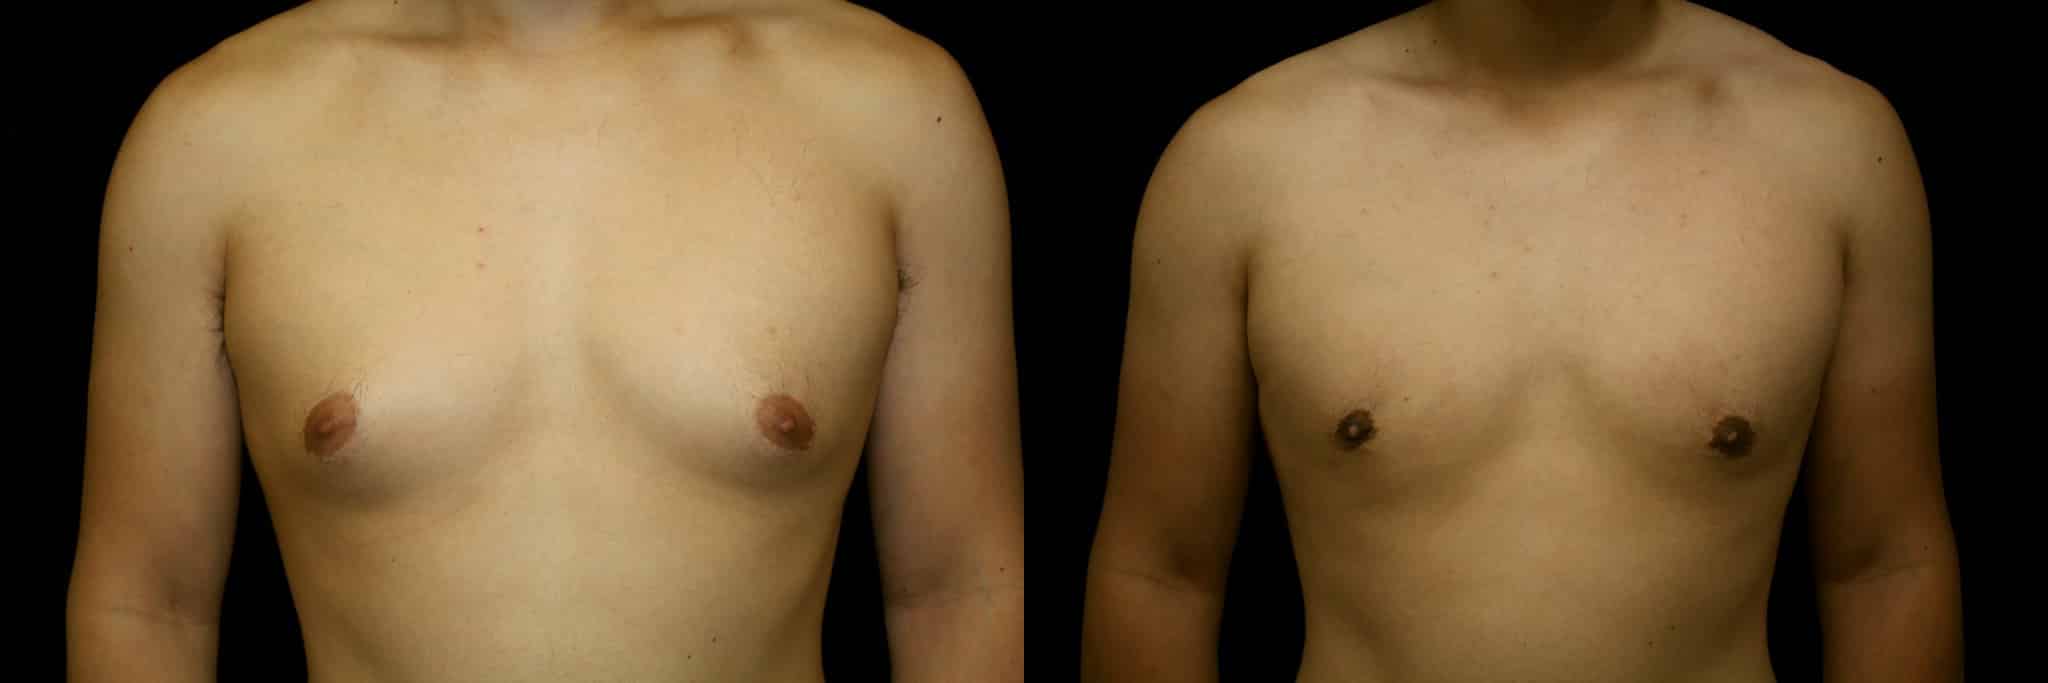 Gynecomastia Patient 6 Before & After